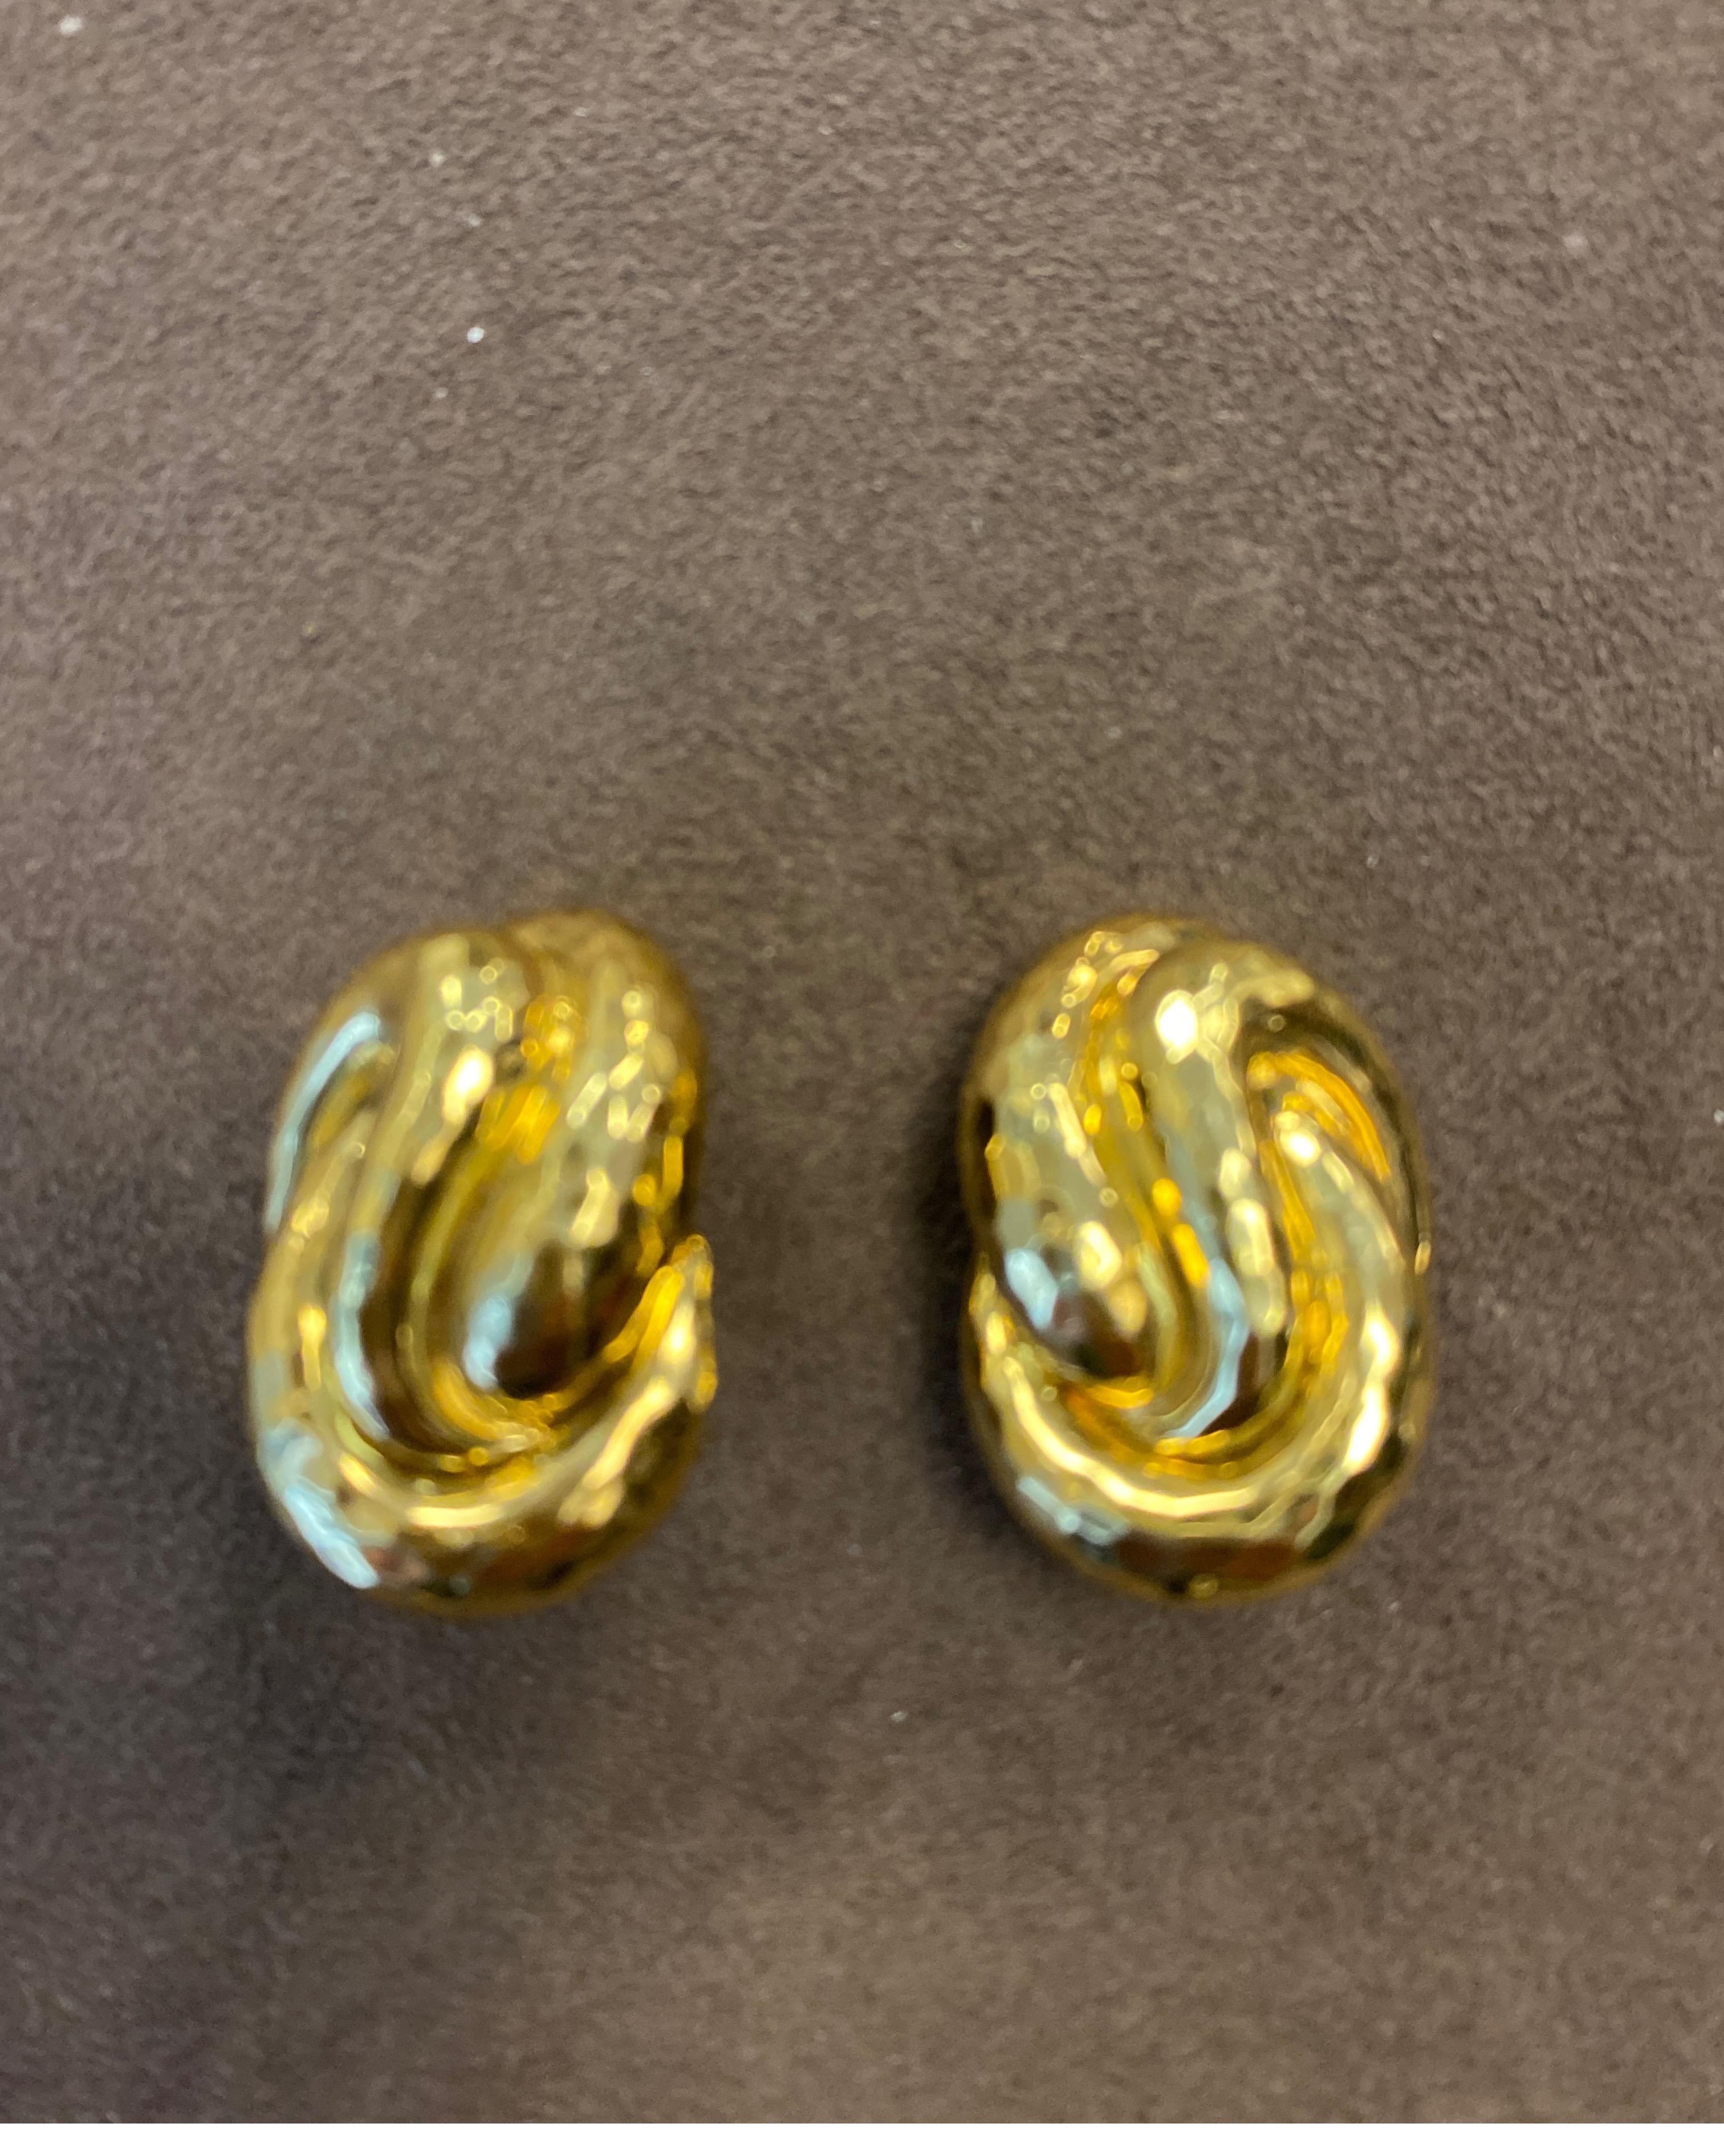 Henry Dunay, 18K yellow gold faceted earclips.
Last retail $7400
Brand new, never worn